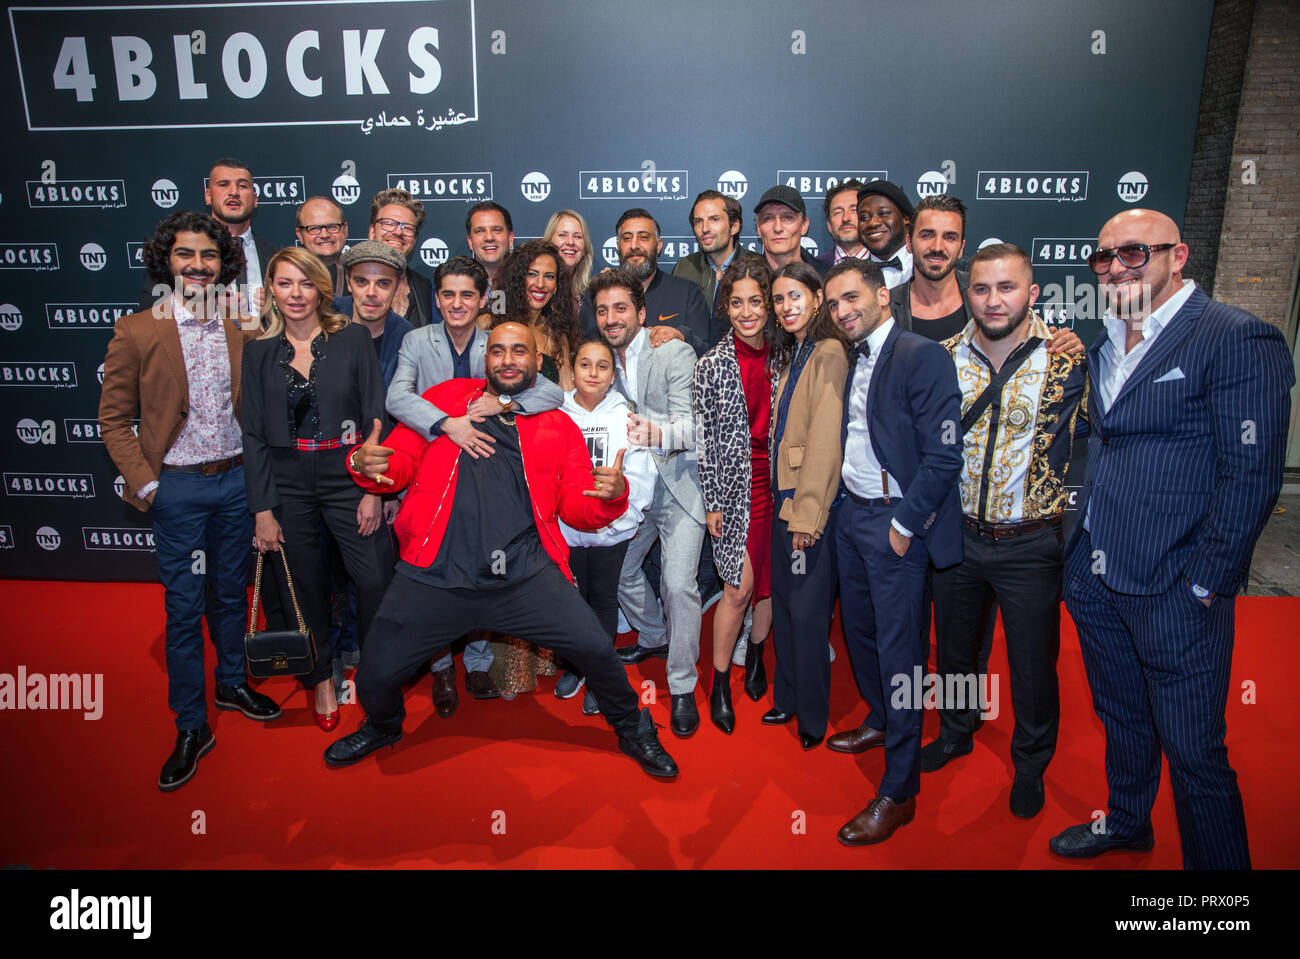 https://c8.alamy.com/comp/PRX0P5/04-october-2018-berlin-rapper-and-actor-veysel-gelin-m-is-on-the-red-carpet-with-actors-and-the-shooting-team-for-the-premiere-of-the-second-season-of-the-tnt-series-4-blocks-photo-jens-bttnerdpa-zentralbilddpa-PRX0P5.jpg